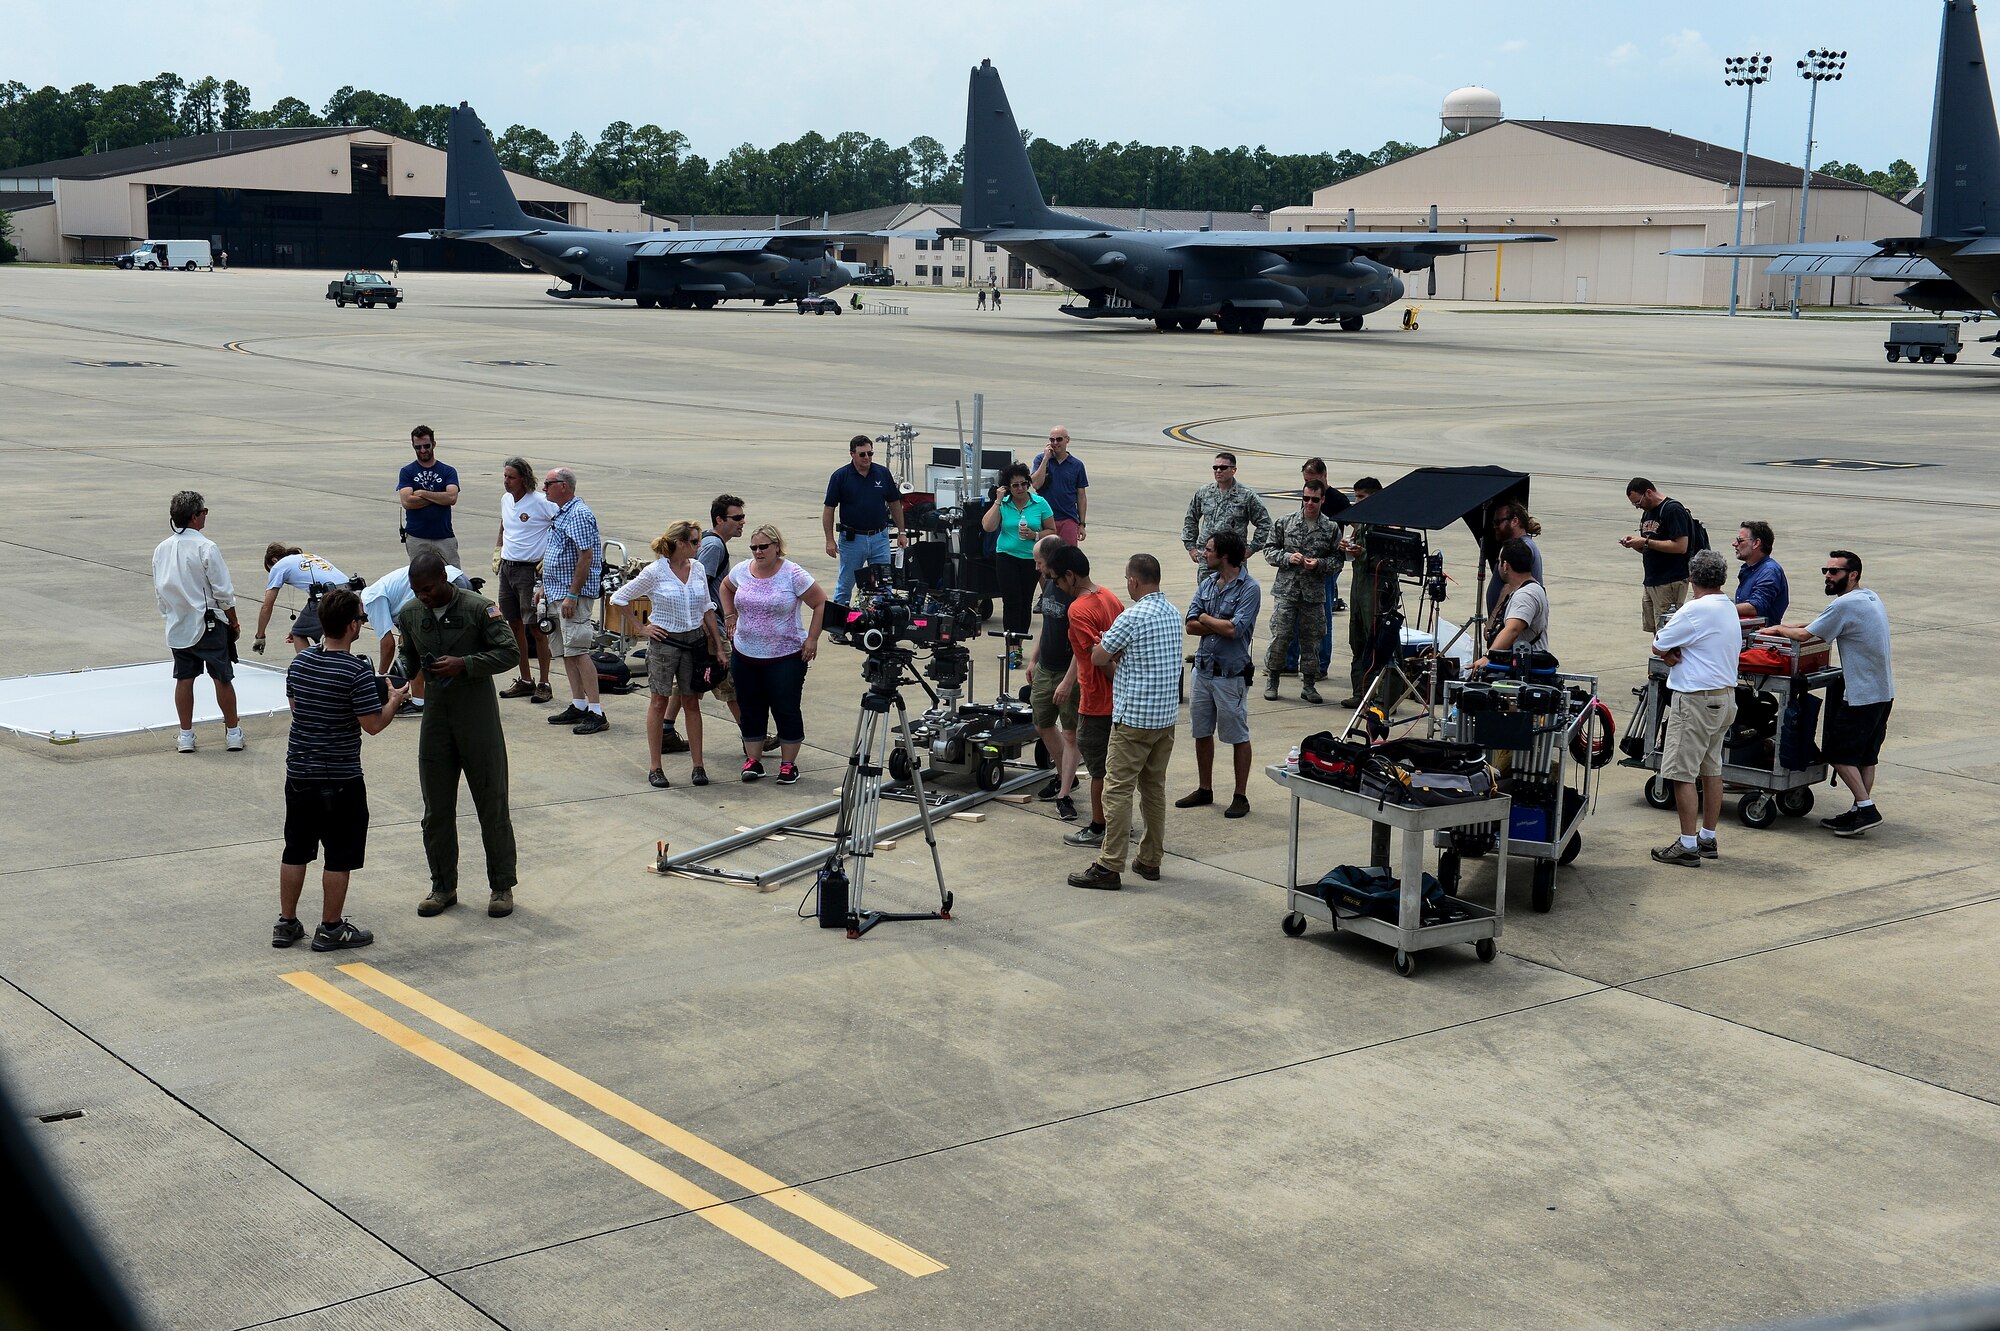 GSD&M Advertising crew set up their equipment prior to filming portions of an Air Force Recruiting commercial at Hurlburt Field, Fla., July 10, 2014. GSD&M Advertising is a company based out of Austin, TX and is contracted by the Air Force Recruiting Service to produce recruiting products. (U.S. Air Force photo/Airman 1st Class Jeff Parkinson)